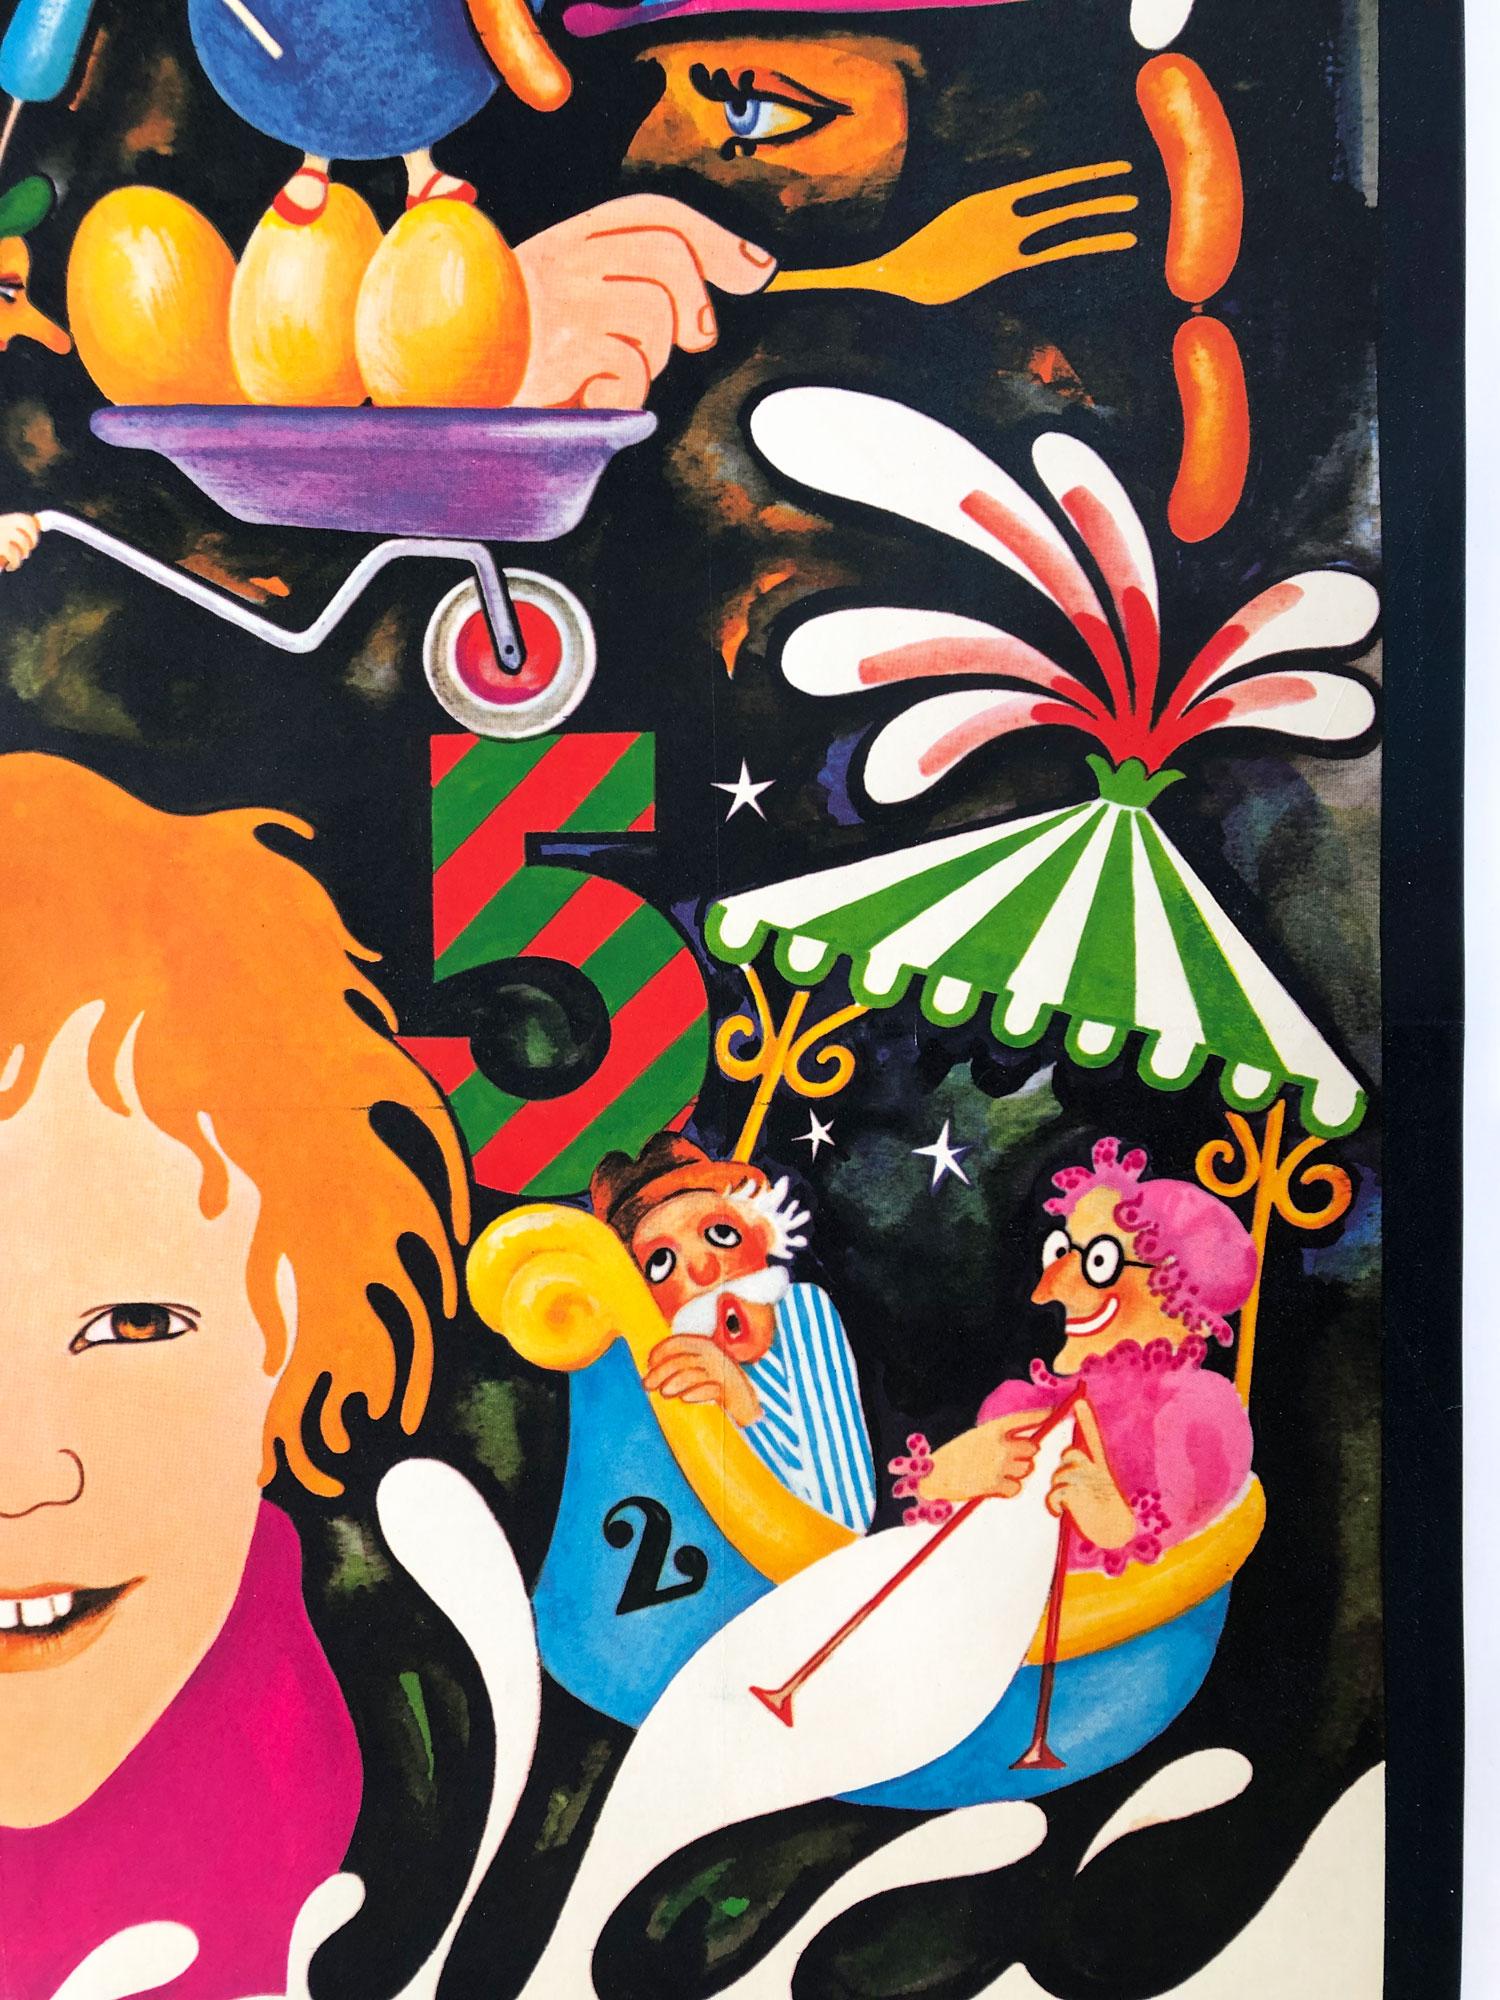 Willy Wonka Large Giant French Film Movie Poster, Bacha, 1971, Linen Backed 1